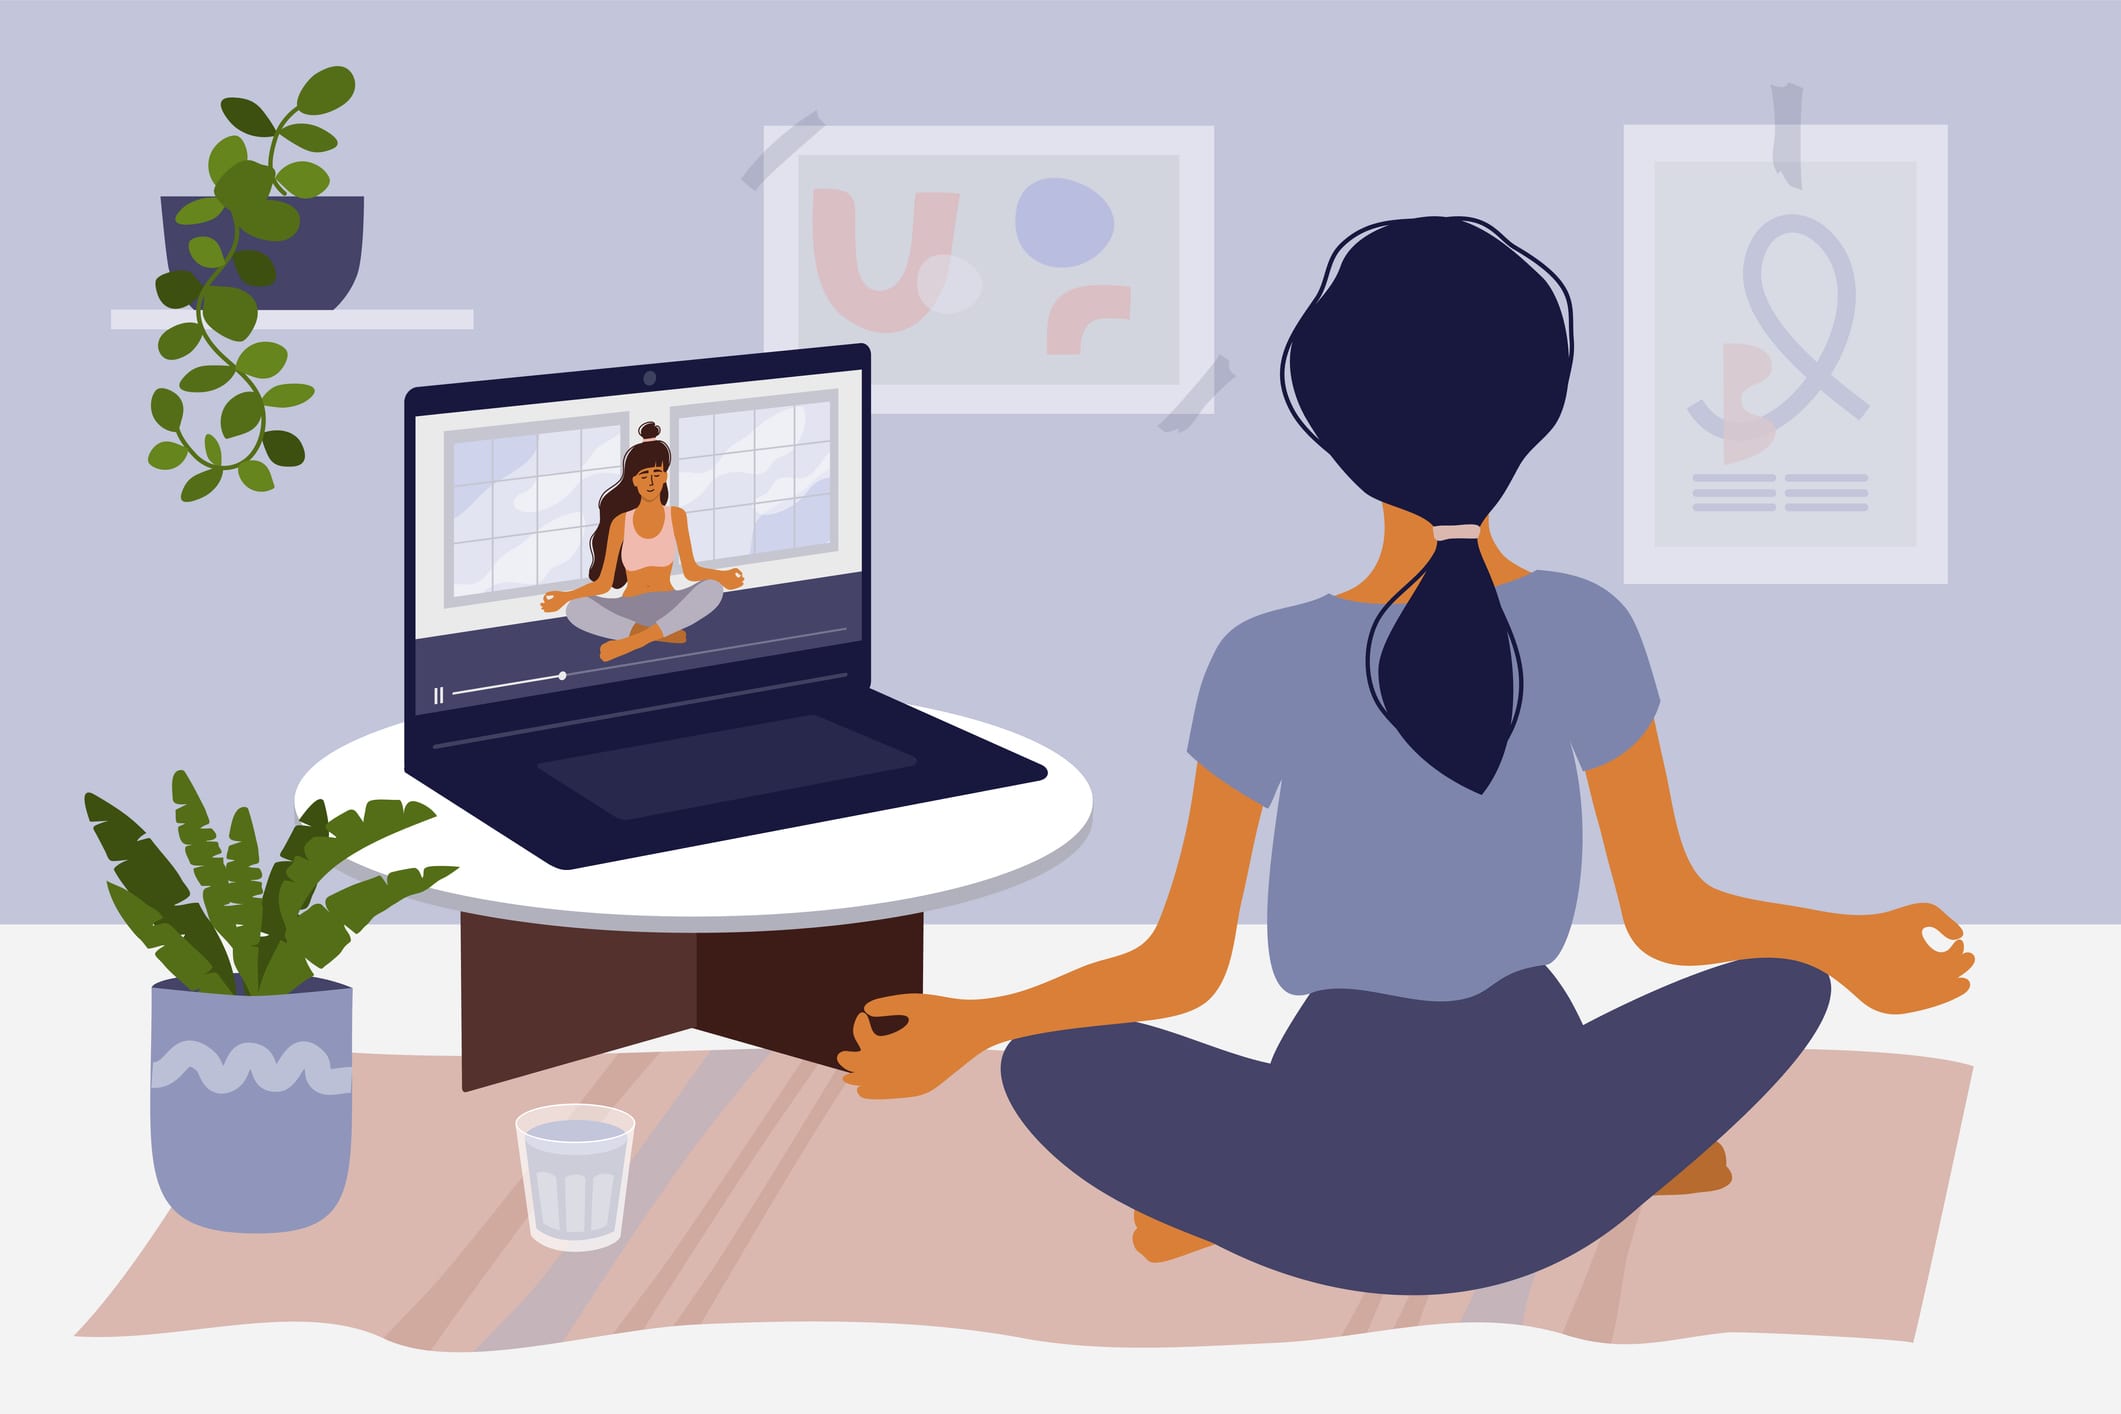 Stay home concept. Girl watching online classes on laptop, practicing yoga, meditation. Live stream, internet education. Woman doing exercise in cozy modern interior. Home activity vector illustration